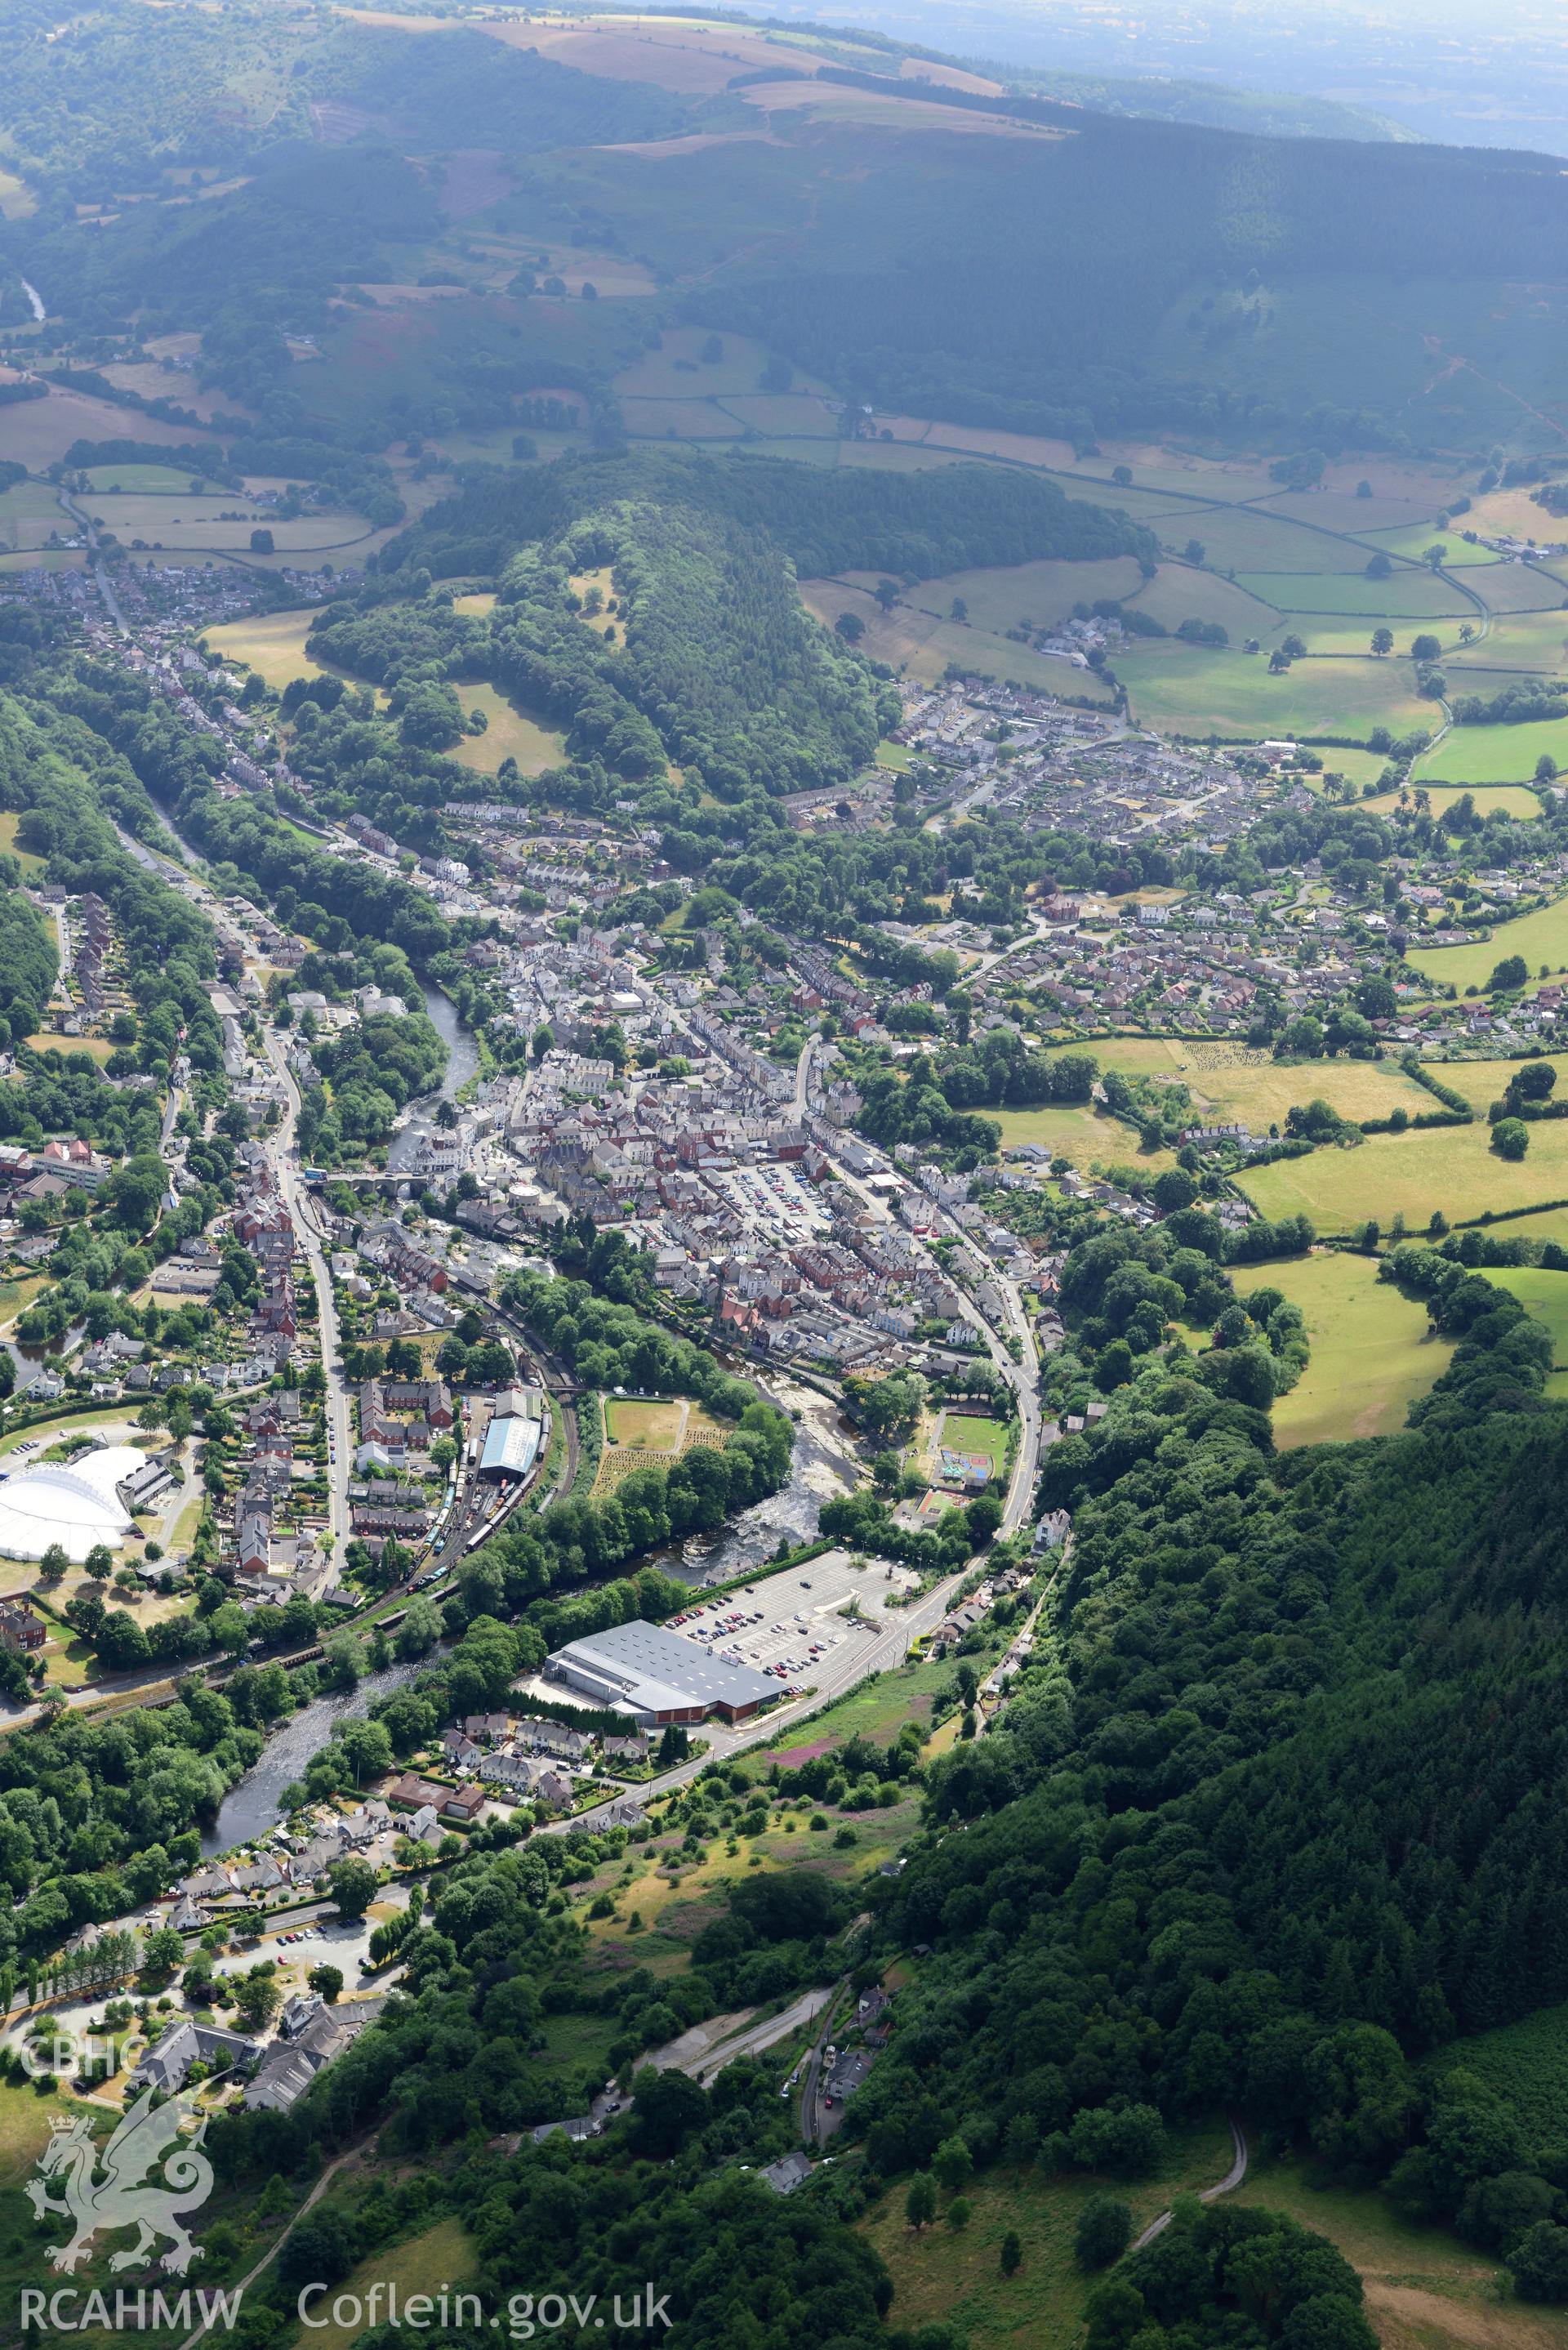 Royal Commission aerial photography of Llangollen from the north-west, taken on 19th July 2018 during the 2018 drought.